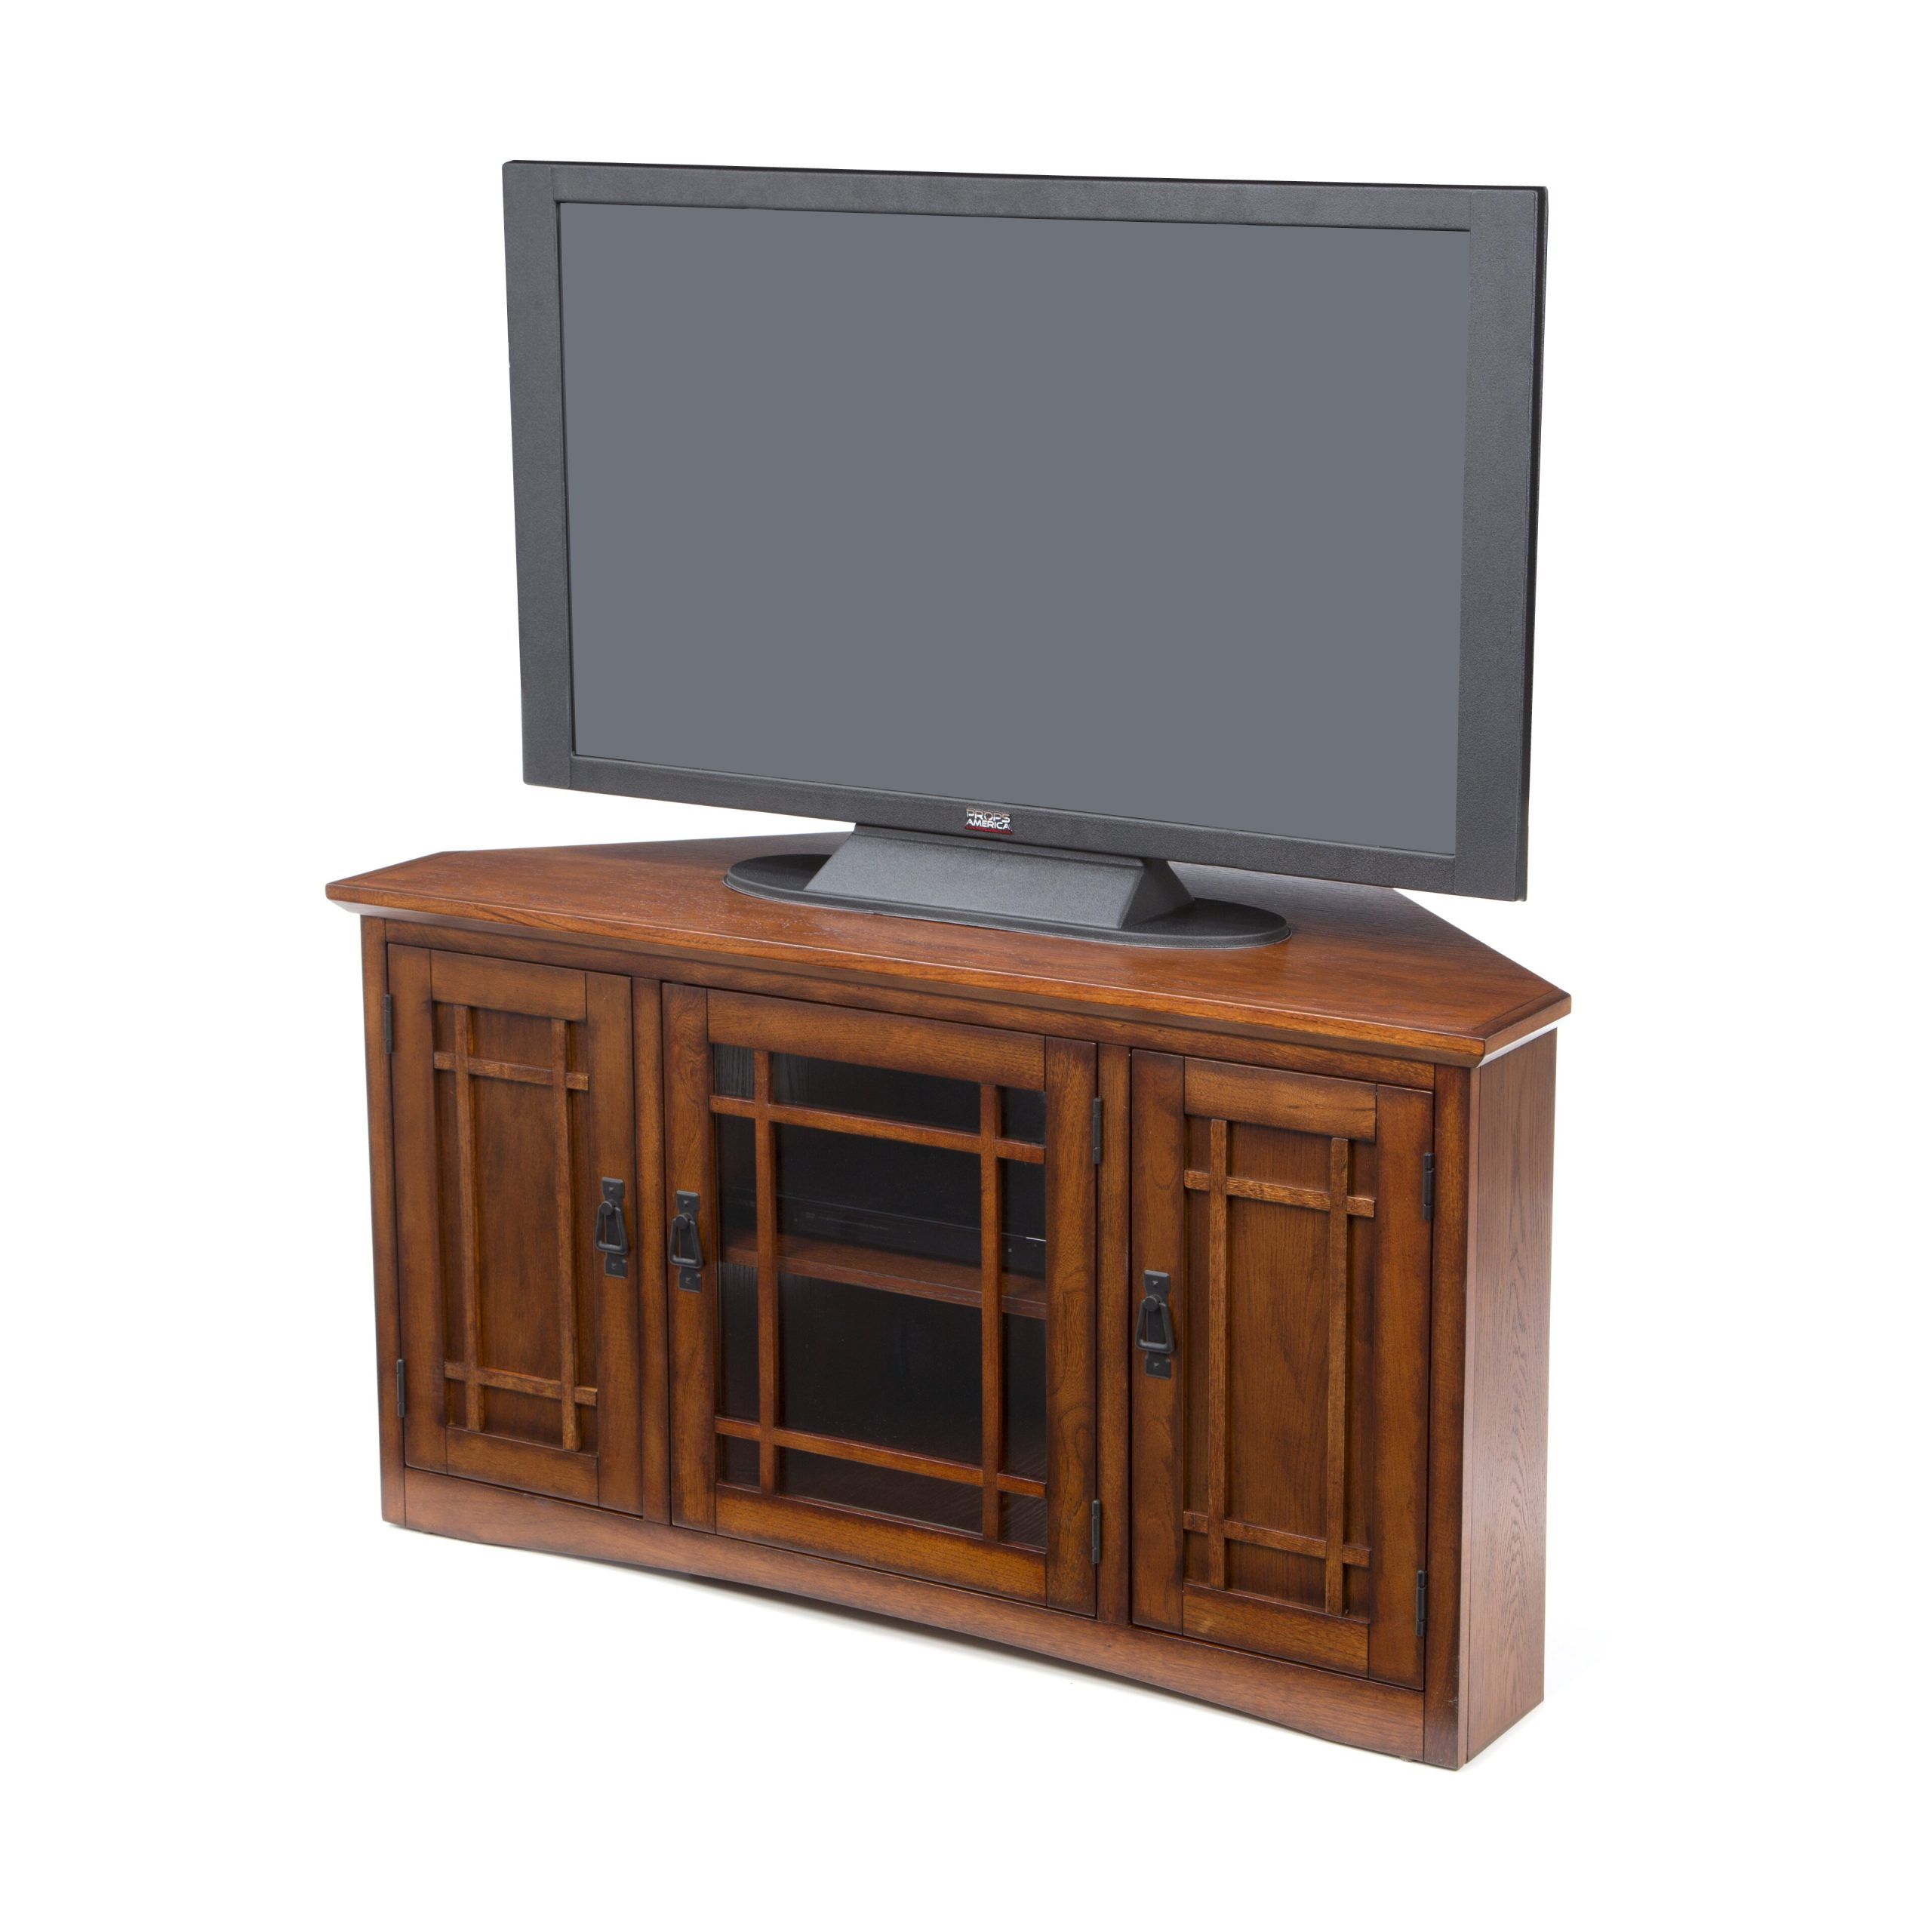 Charlton Home Stodeley Corner Tv Stand & Reviews | Wayfair Intended For Tv Stands Corner Units (View 13 of 15)